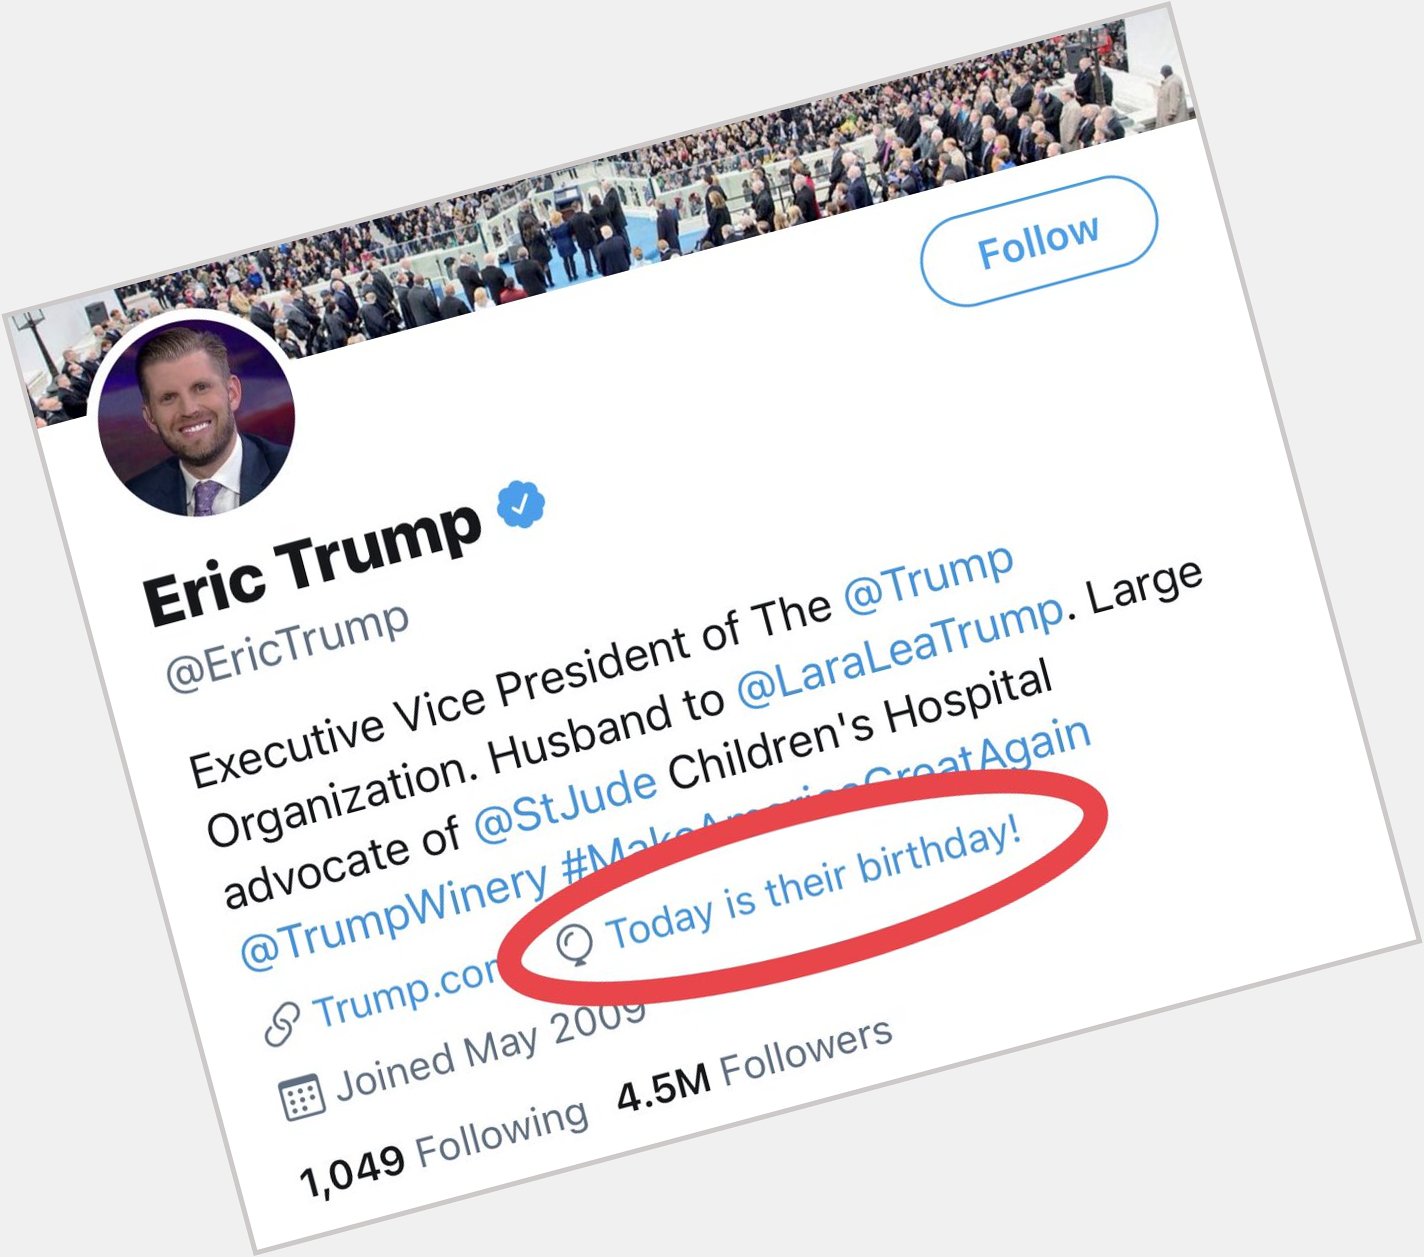 Looks like Eric Trump uses they/them pronouns. Good to know. Happy birthday  